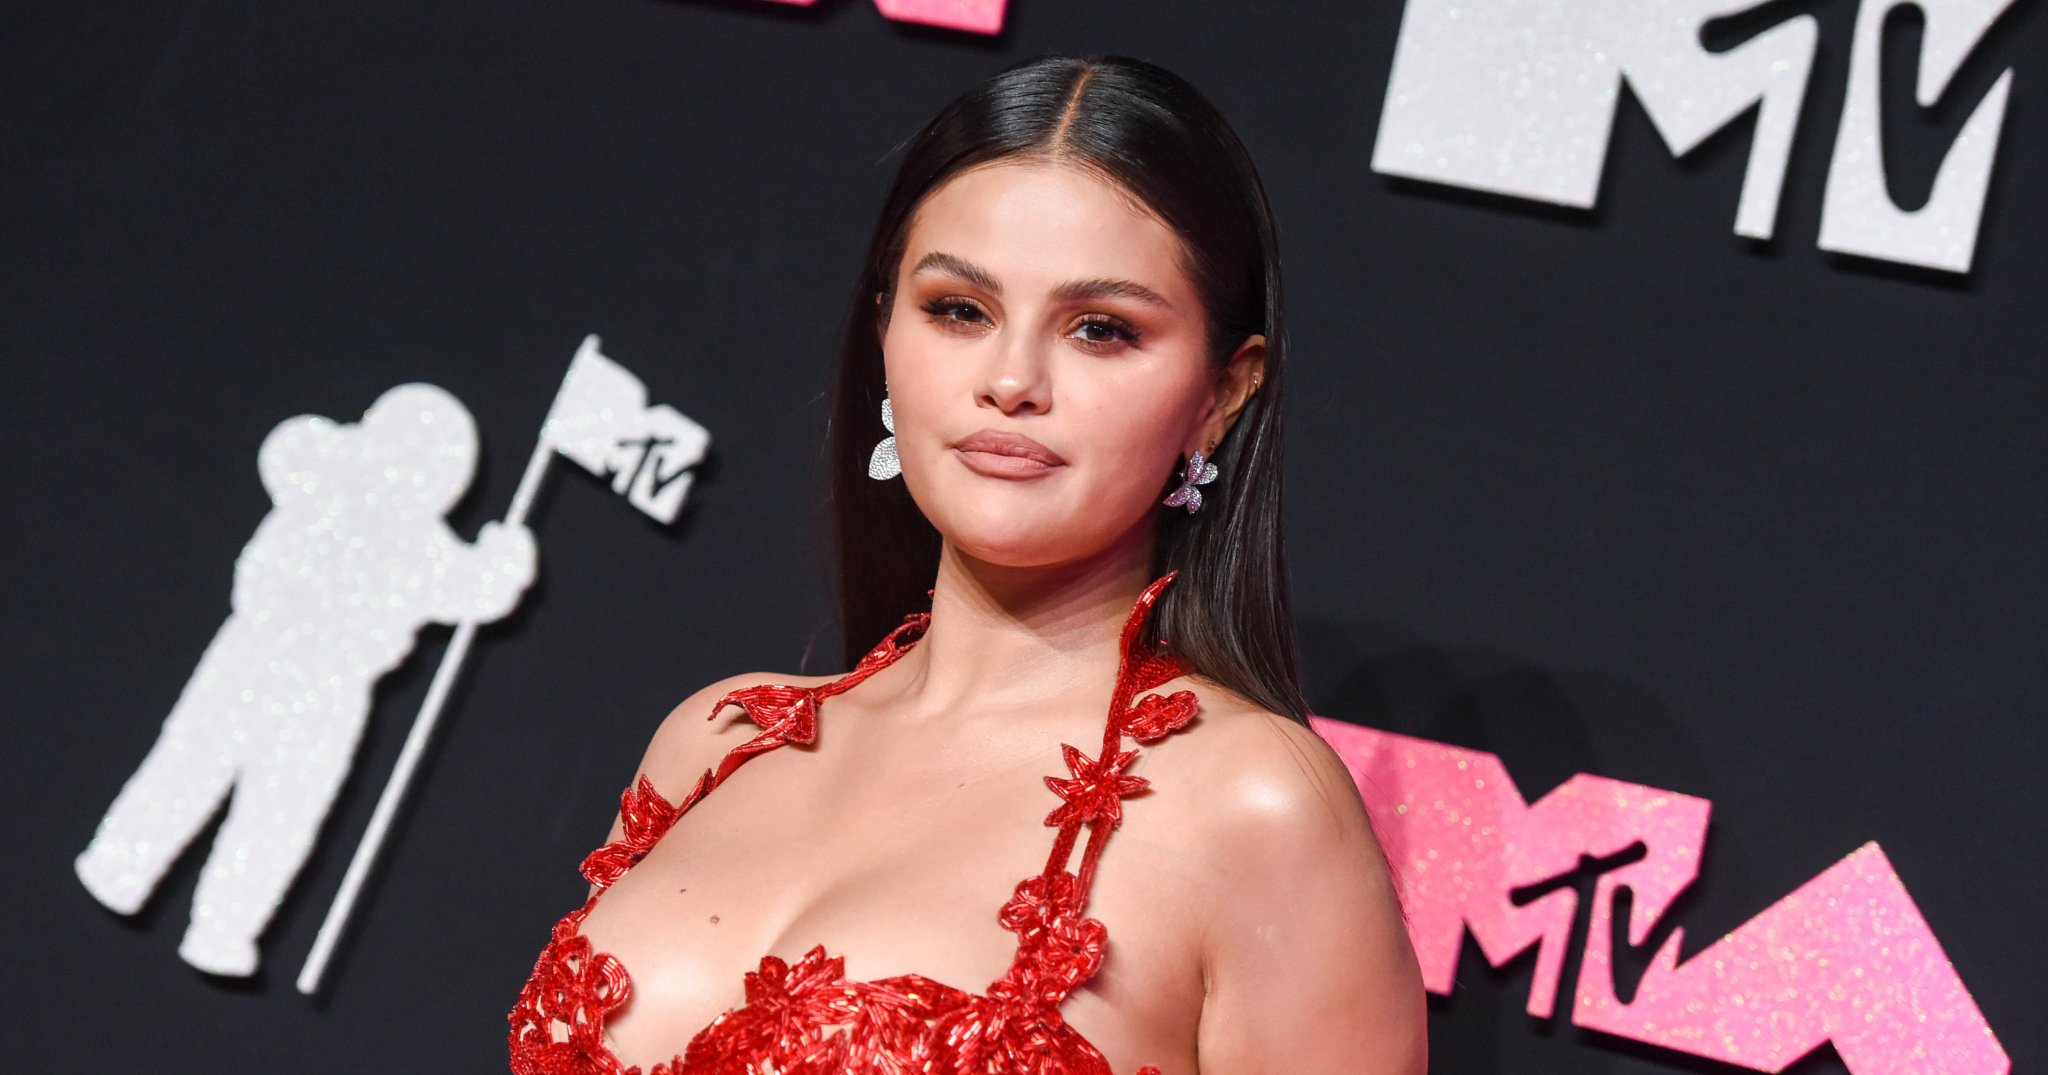 Selena Gomez Sets the VMAs Red Carpet Ablaze in a Lacy Beaded Dress